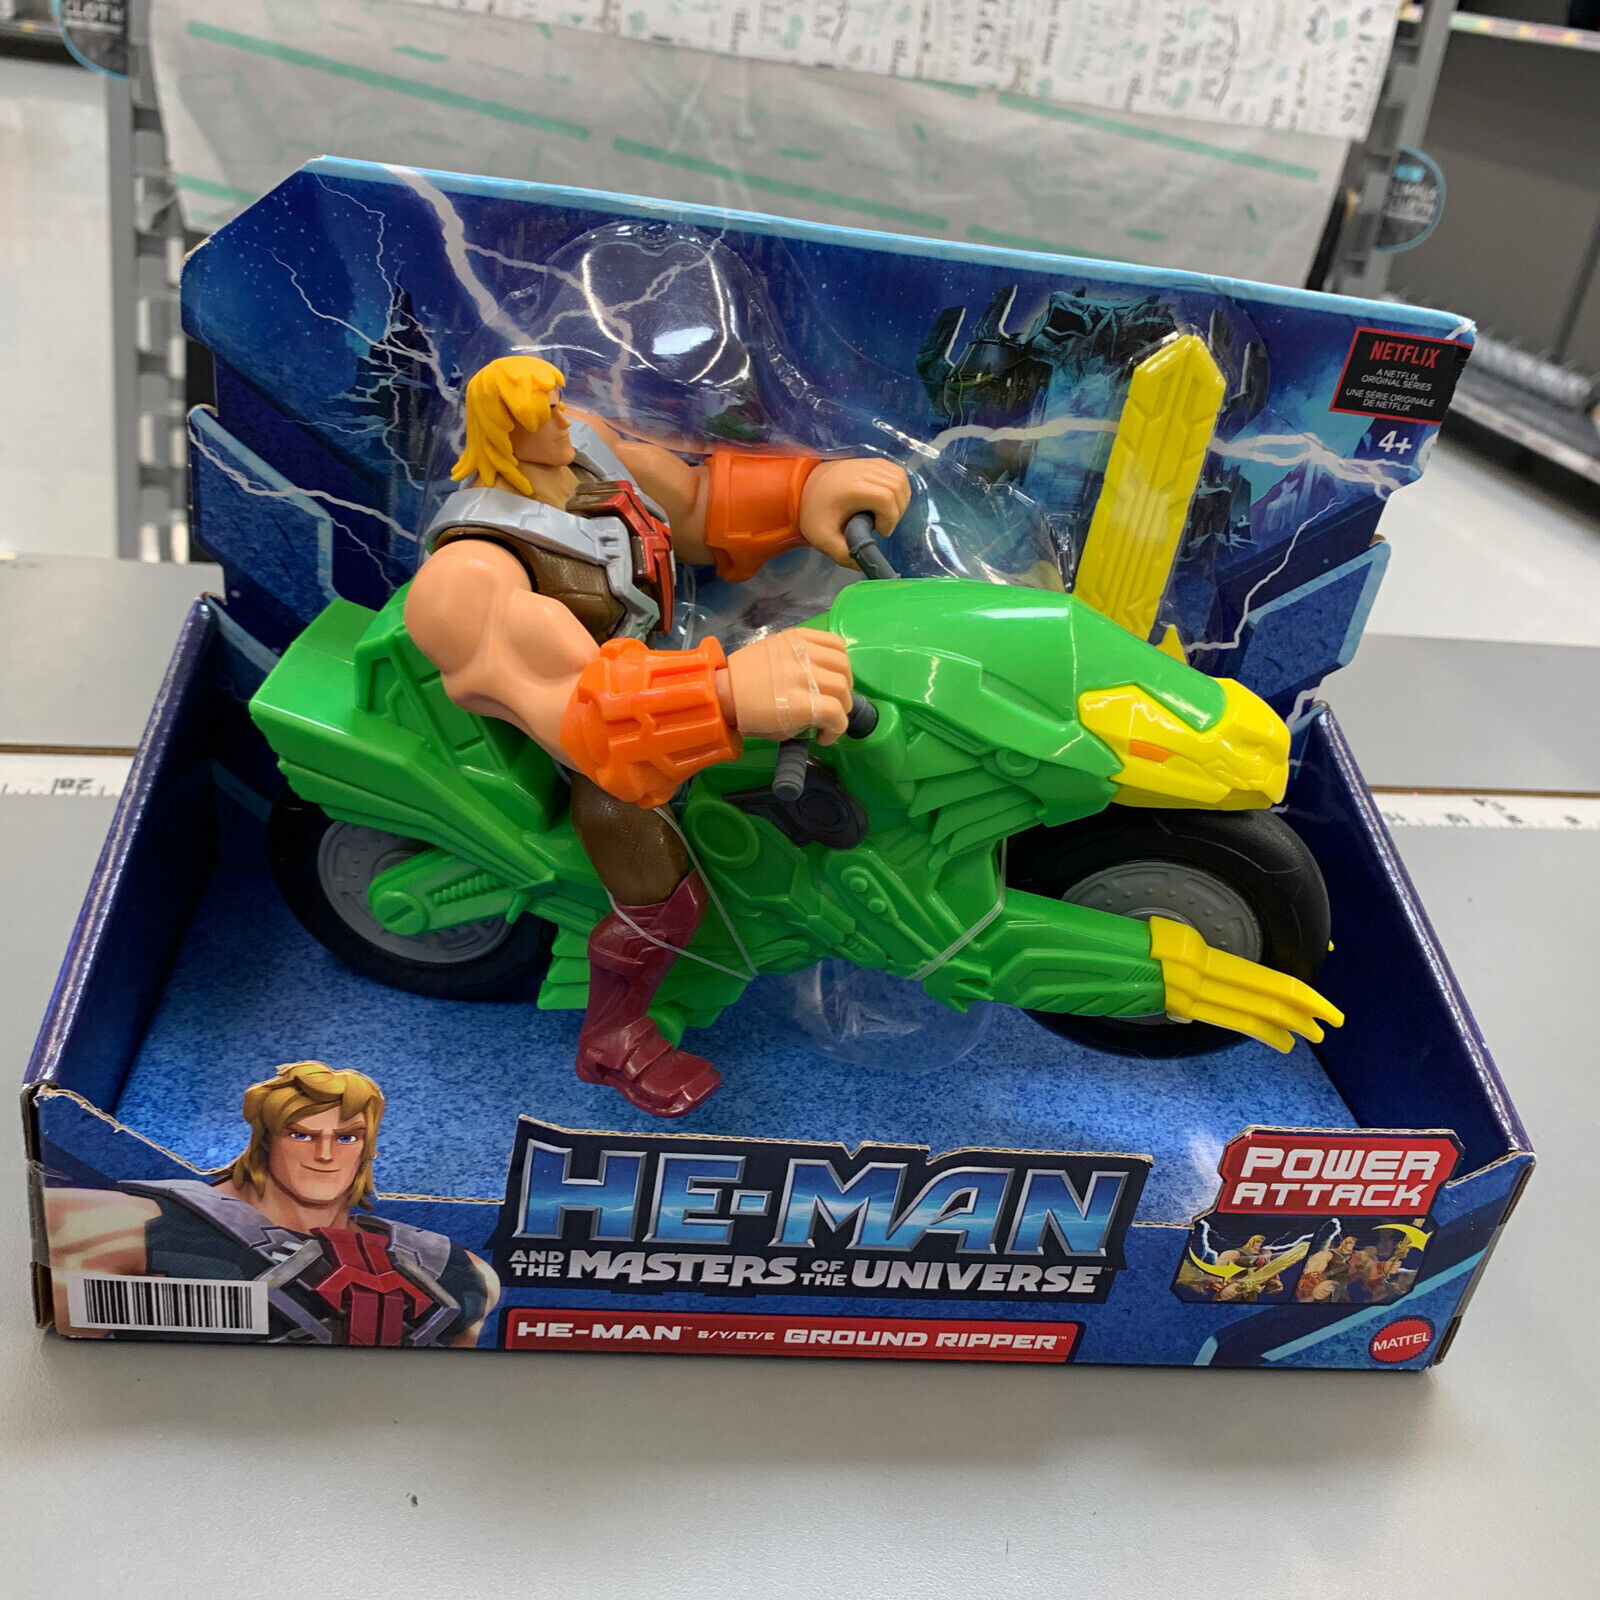 HE-MAN Masters of the Universe Power Attack Vehicle -Ground Ripper 2021